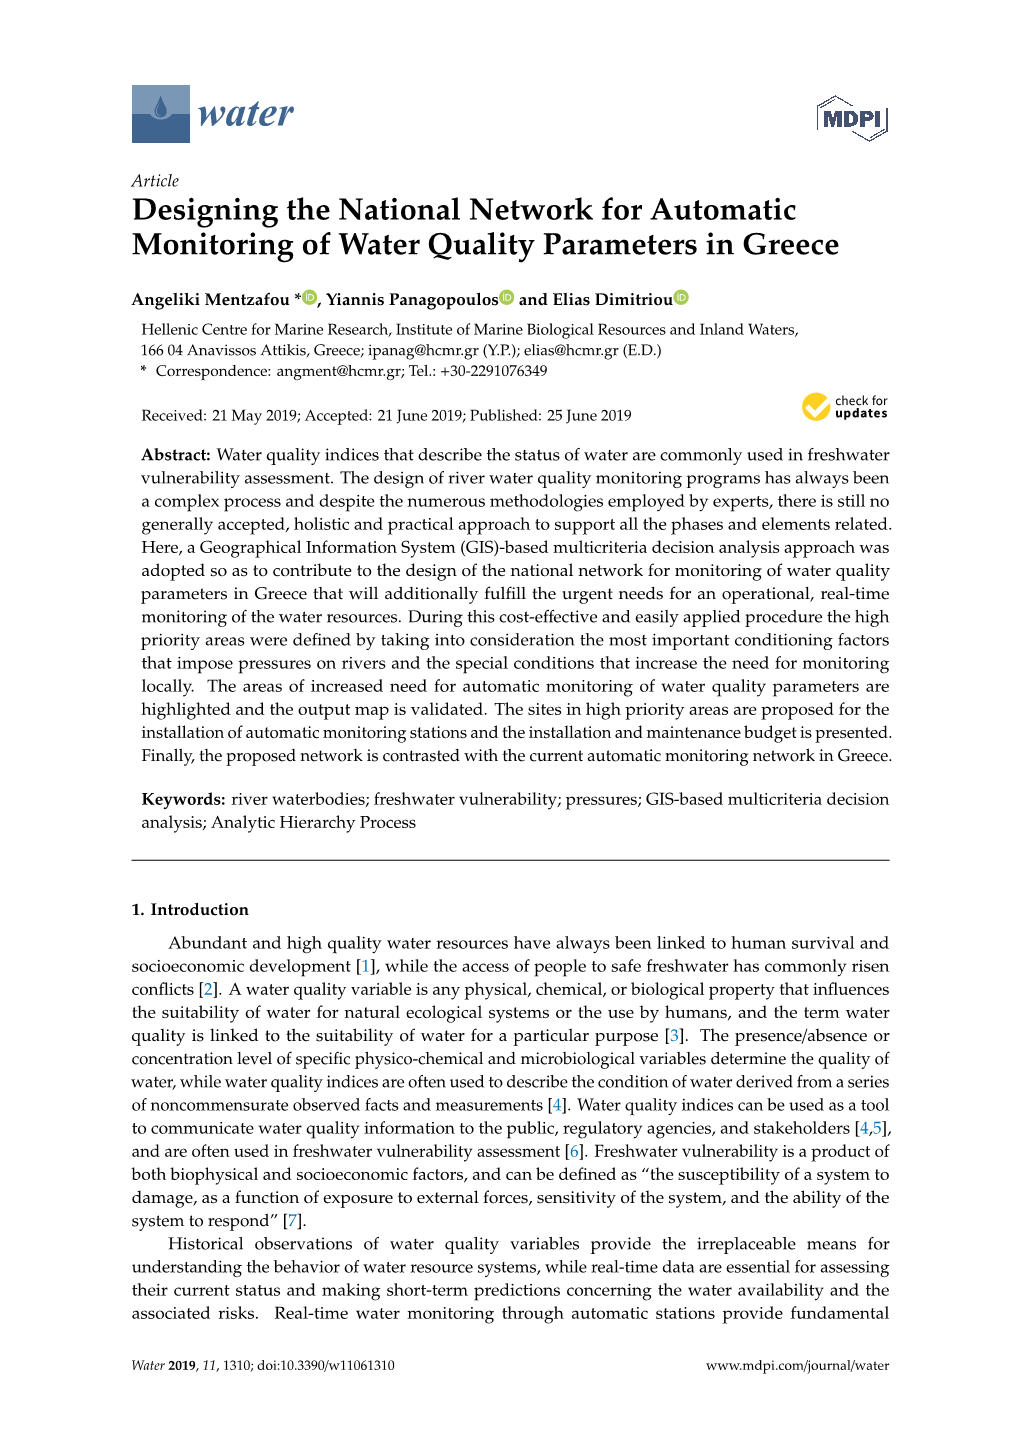 Designing the National Network for Automatic Monitoring of Water Quality Parameters in Greece